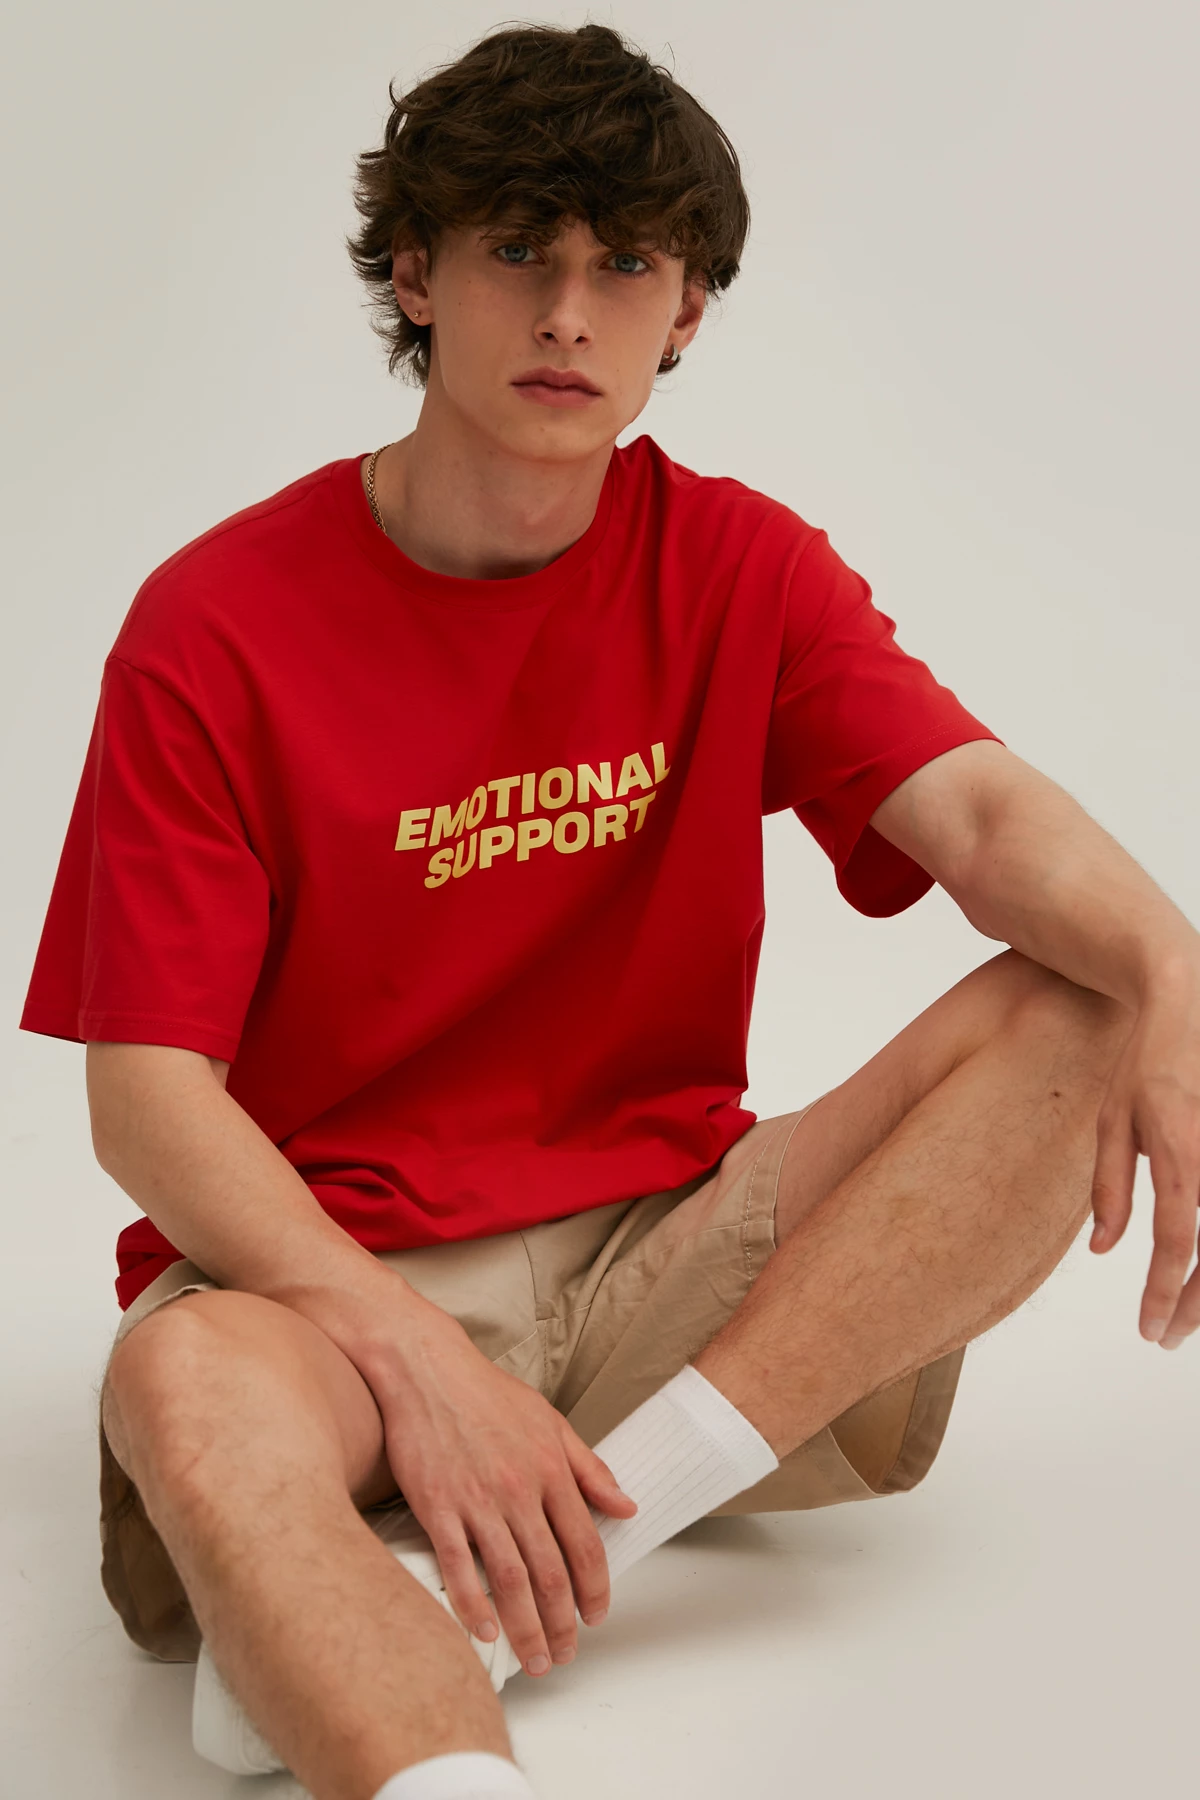 Red jersey unisex T-shirt "Emotional support", photo 10